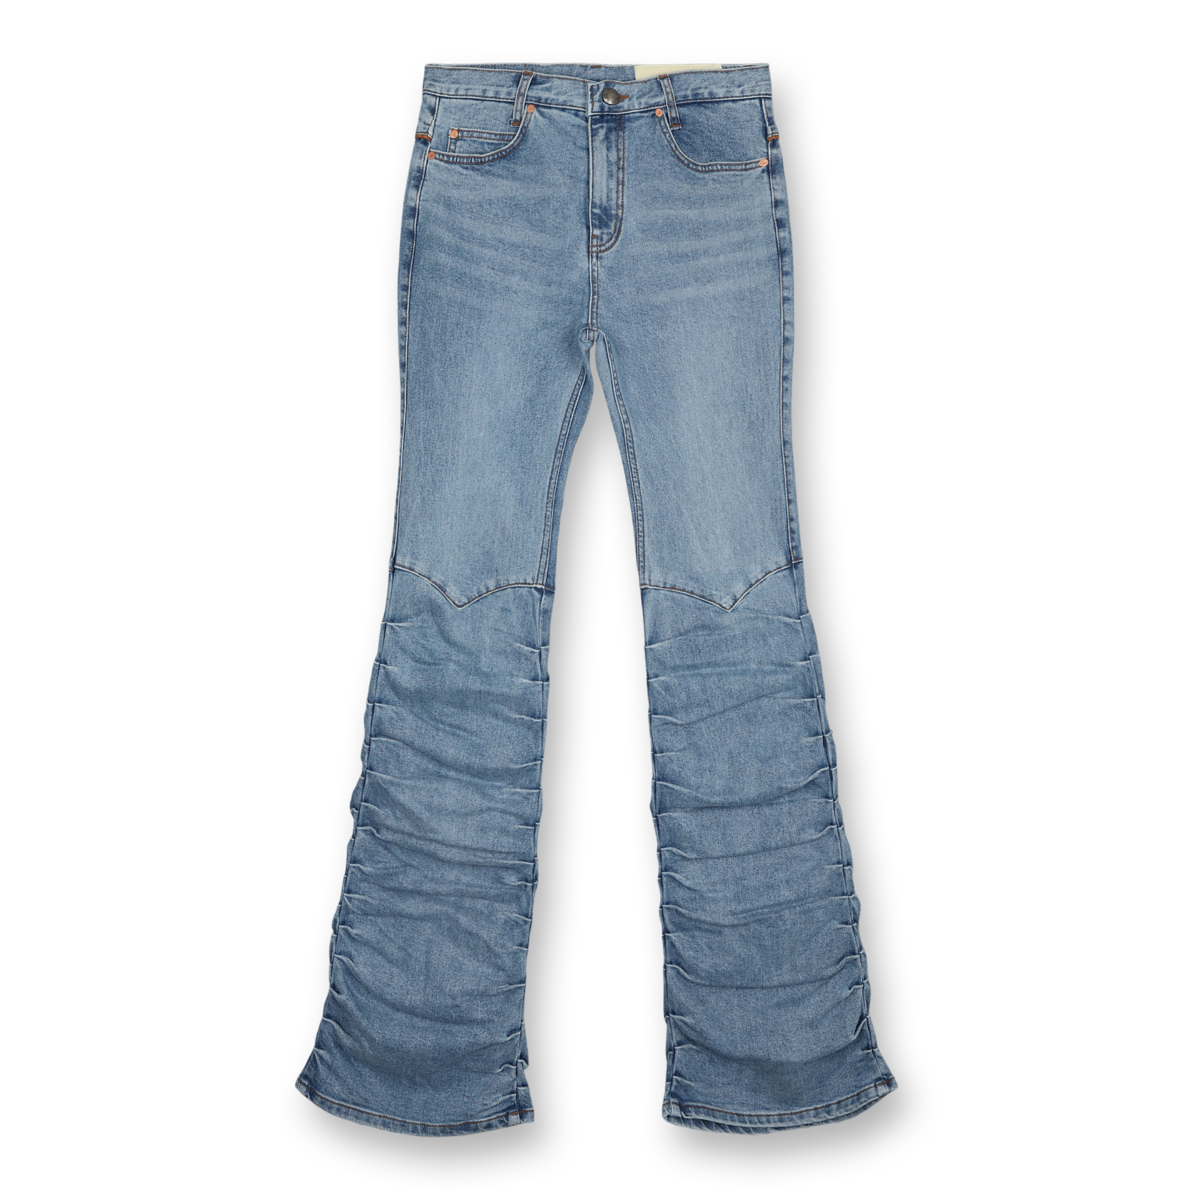 Martina Western Boots Wrinkle Jeans